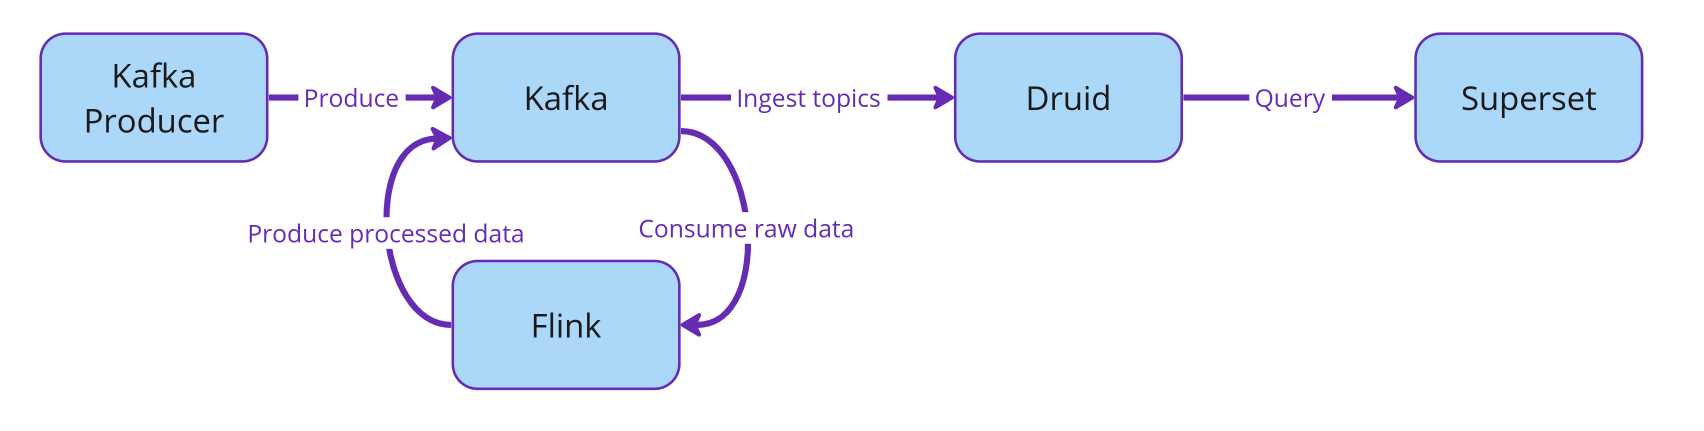 Diagram of the streaming analytics infrastructure